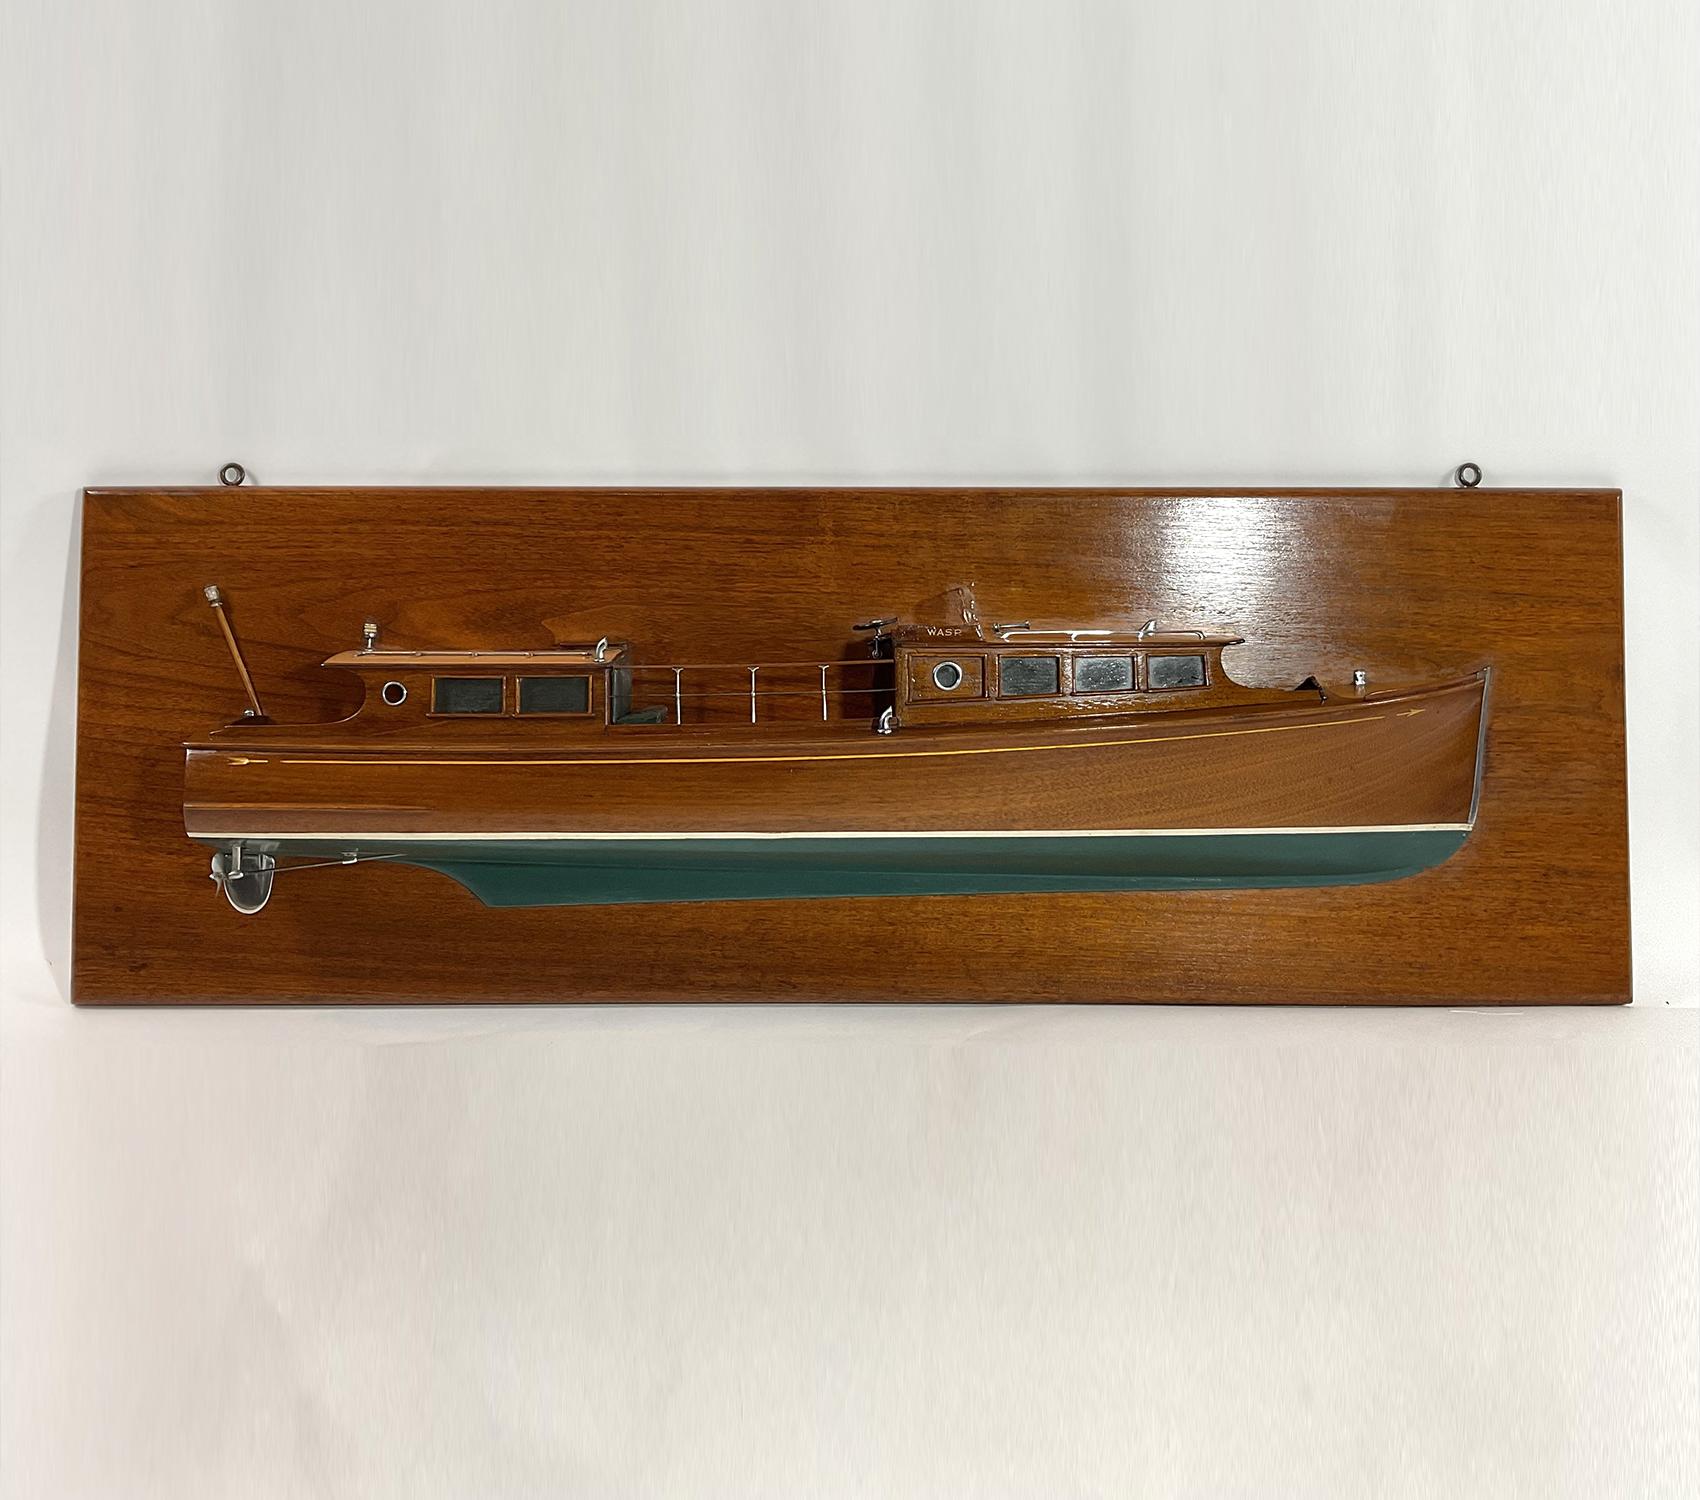 Period builders model of the motor yacht 